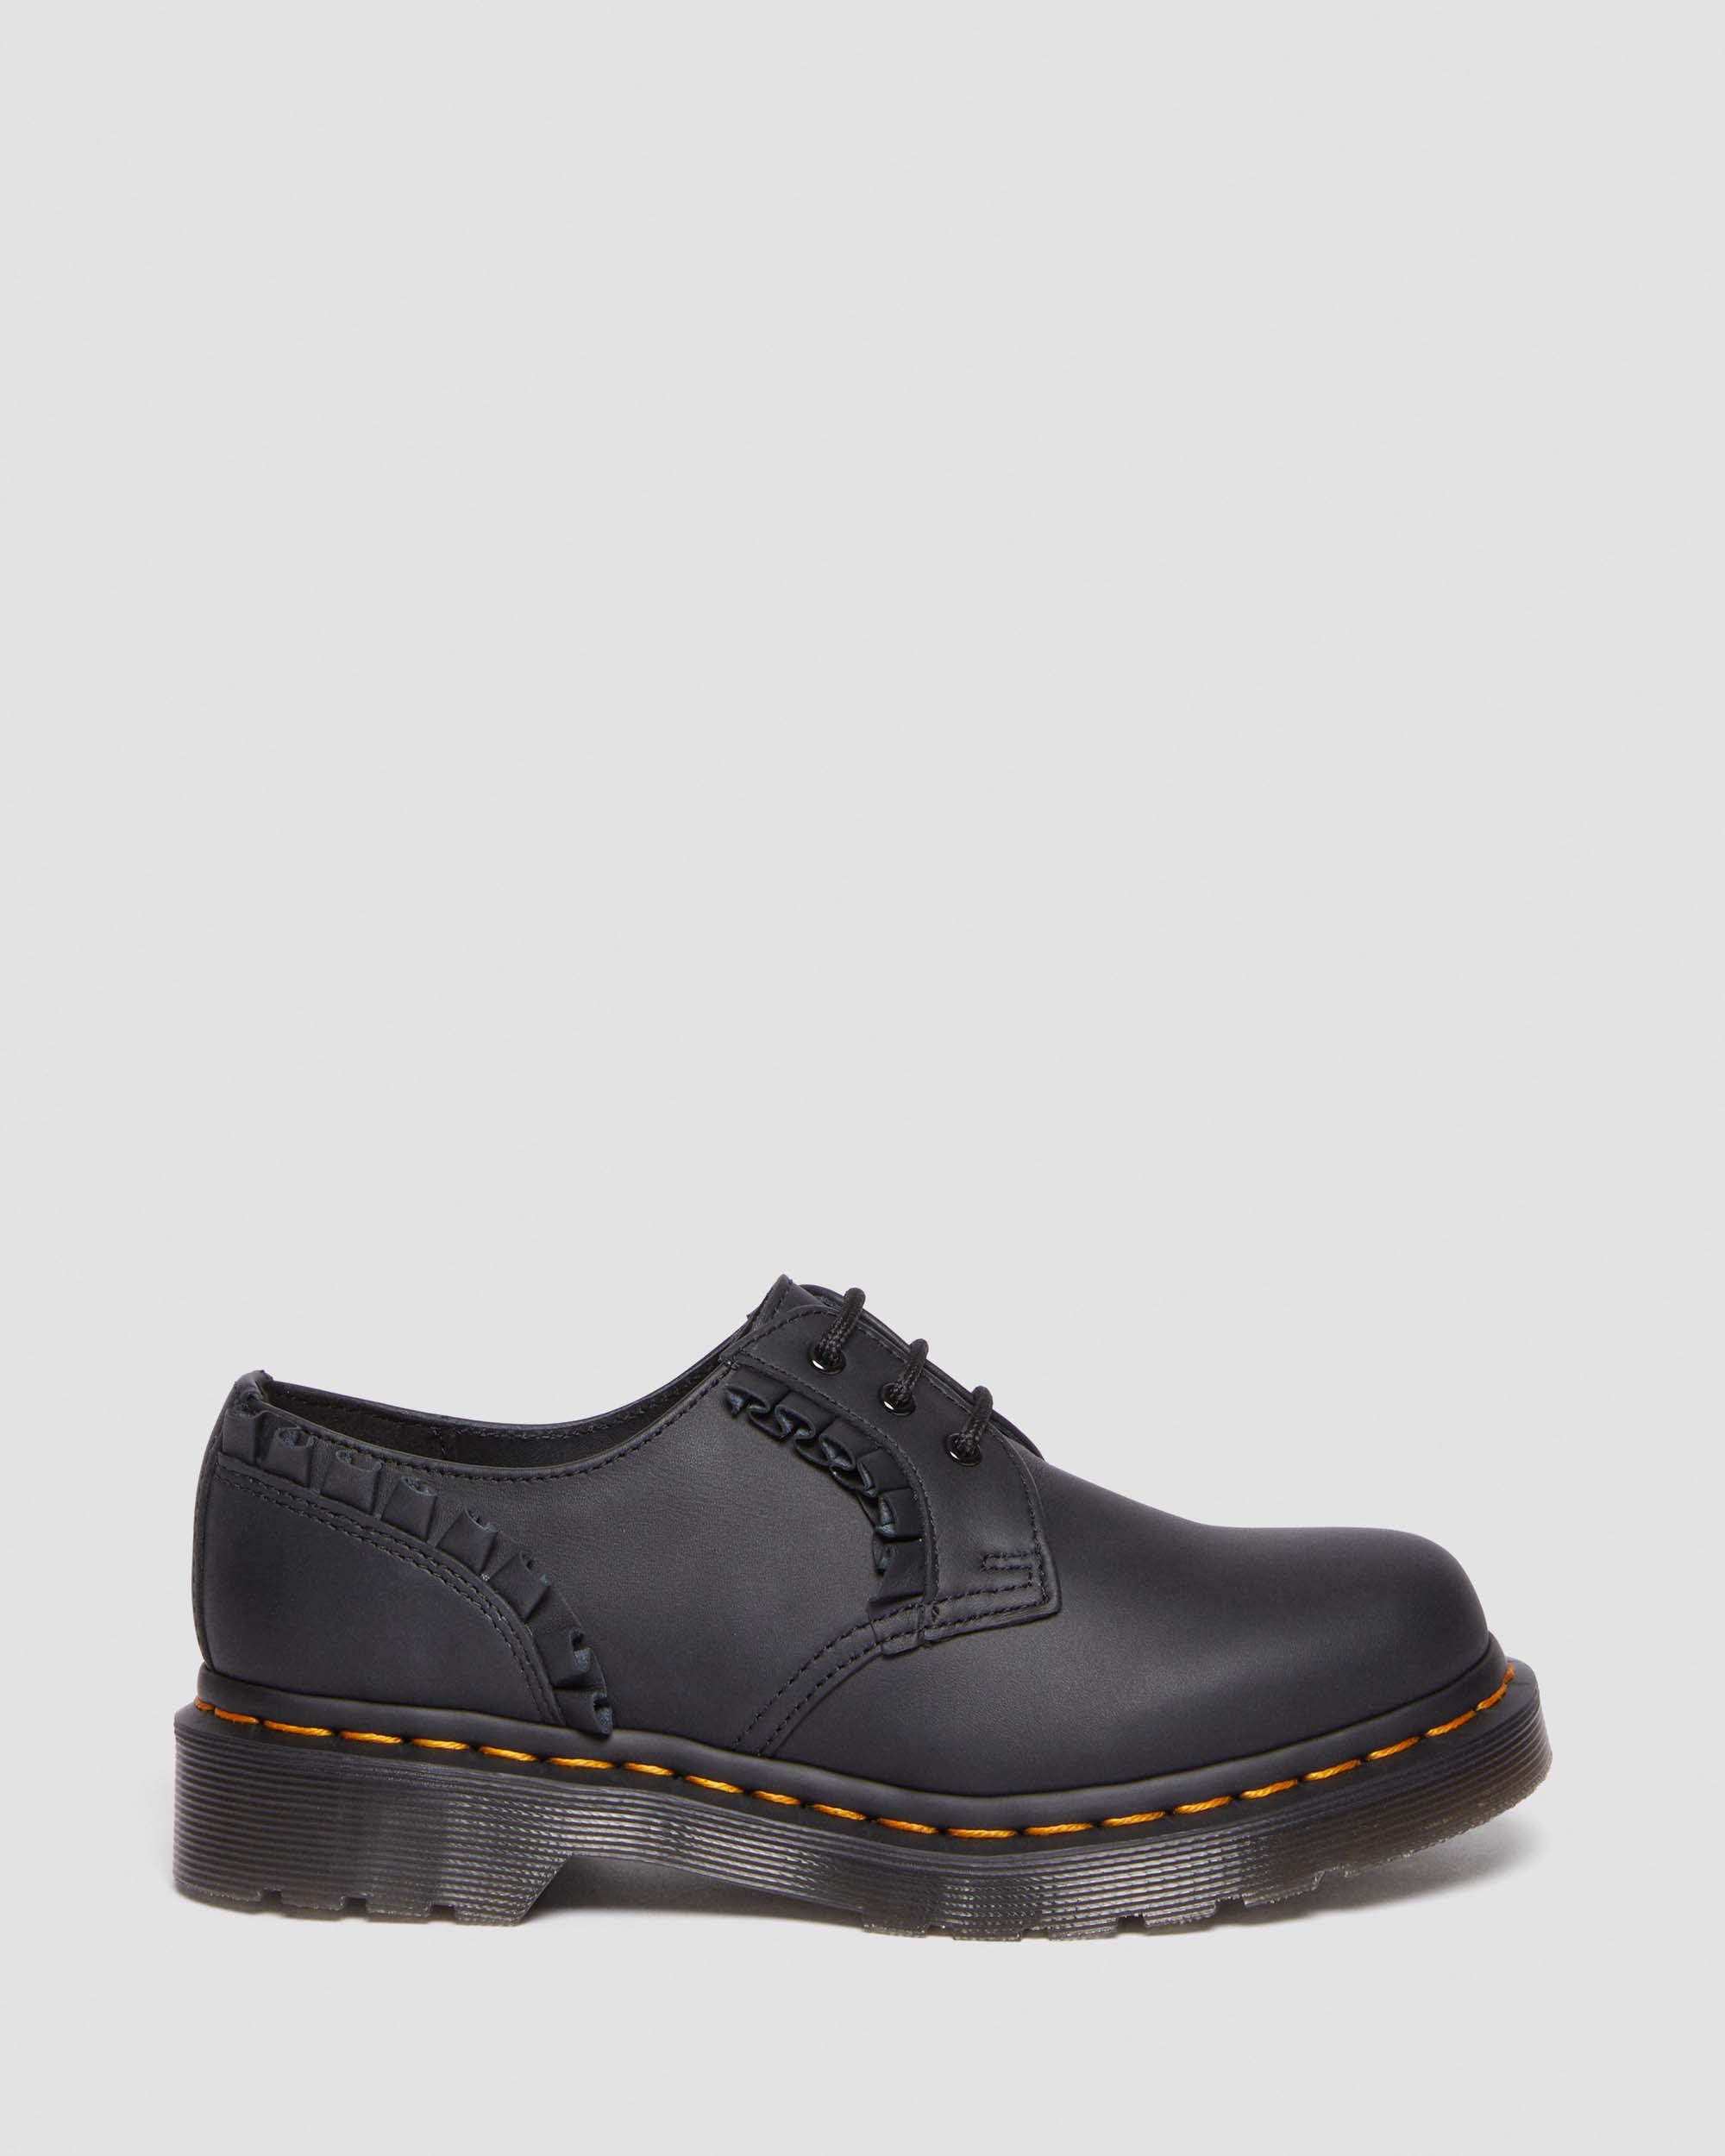 1461 Women's Frill Nappa Leather Oxford Shoes in Black | Dr. Martens